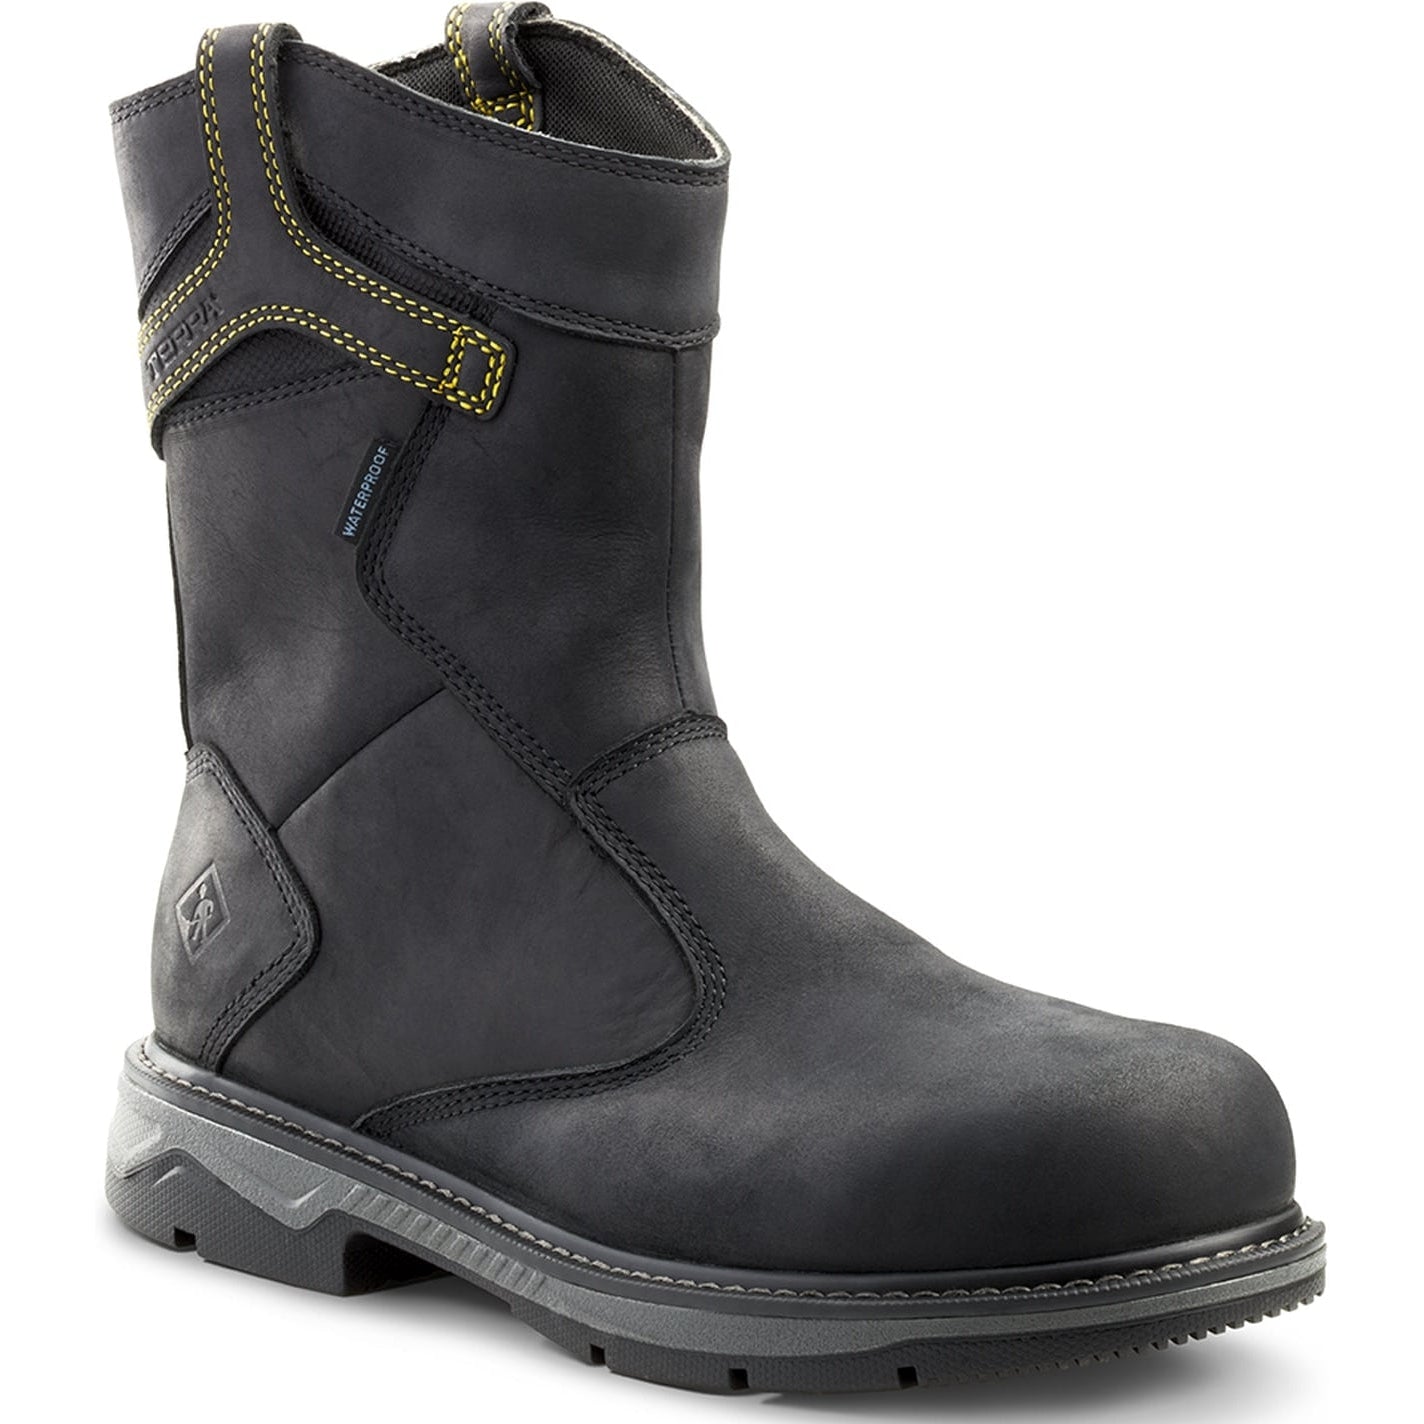 Terra Men's Patton AT Waterproof Pull-On Safety Work Boot -Black- 4TCBBK 7 / Wide / Black - Overlook Boots